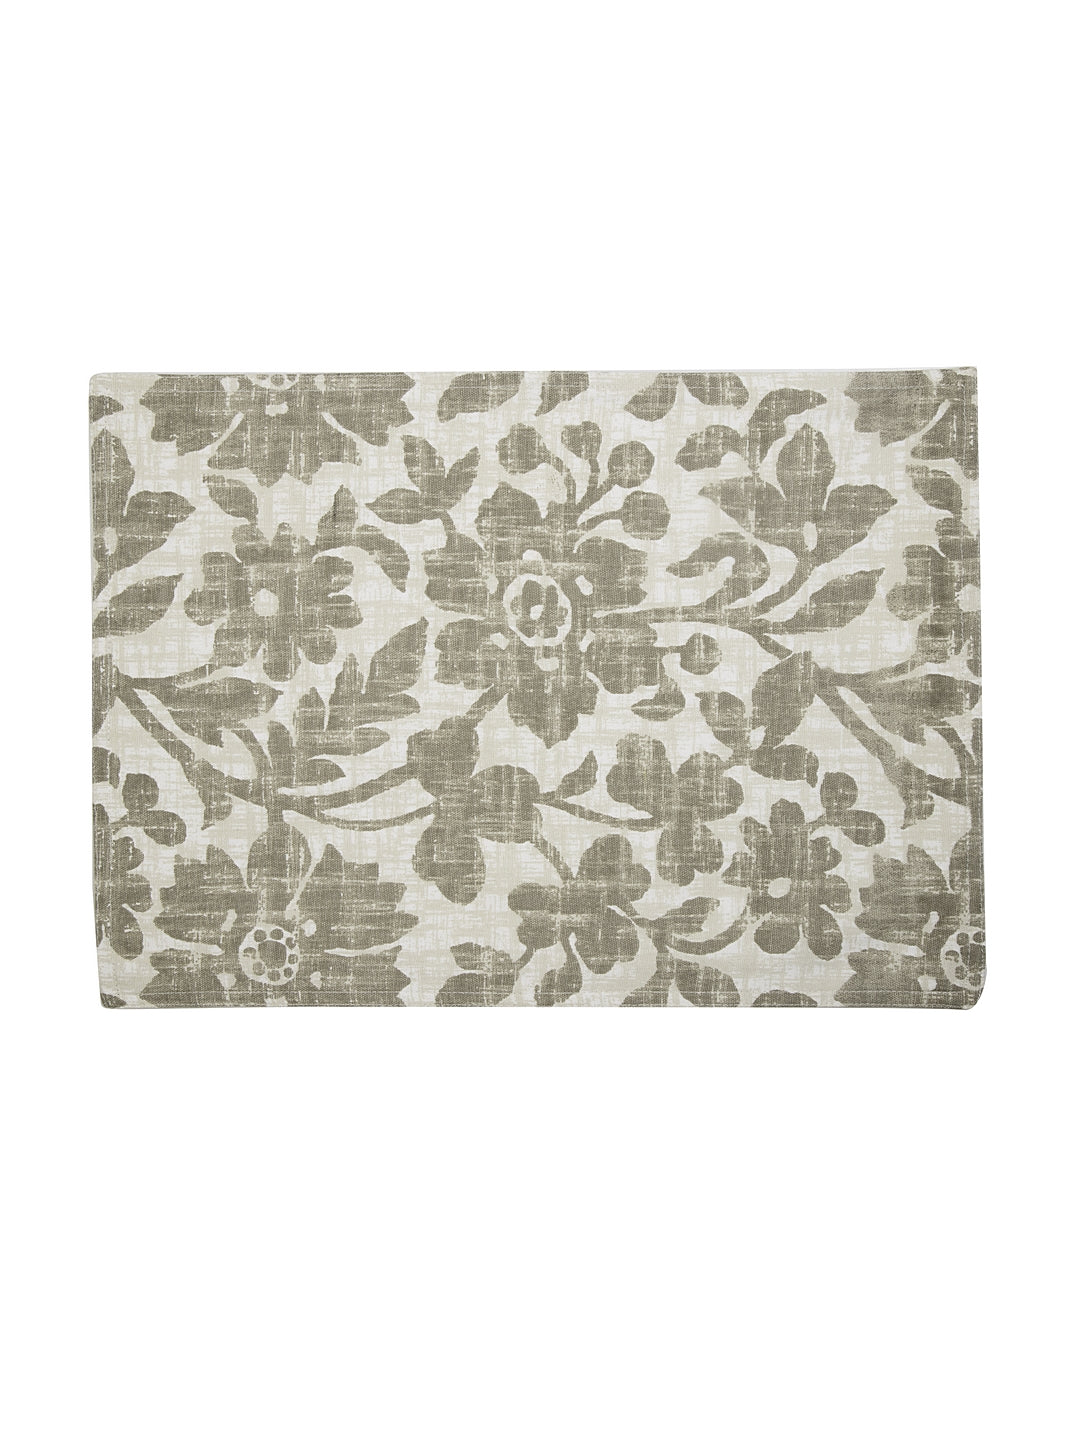 Set of 8 Baroque Placemats